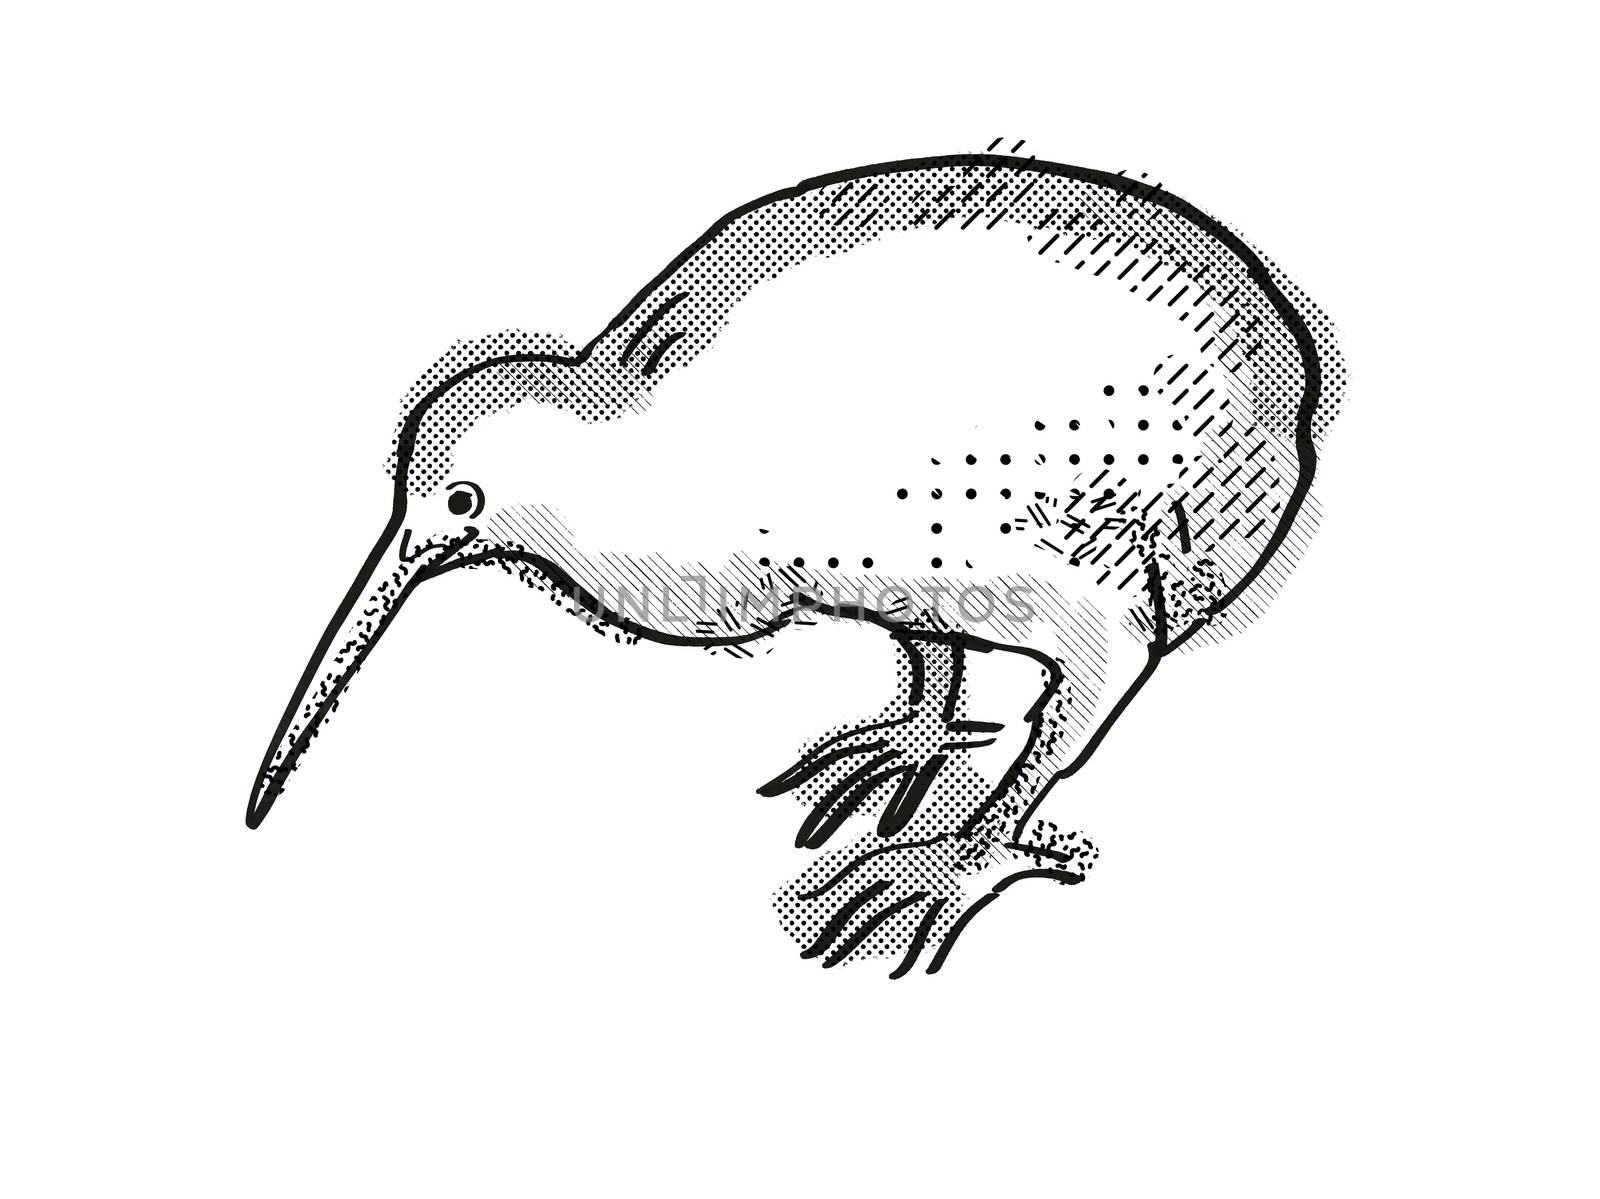 Retro cartoon style drawing of a kiwi , a New Zealand bird on isolated white background done in black and white